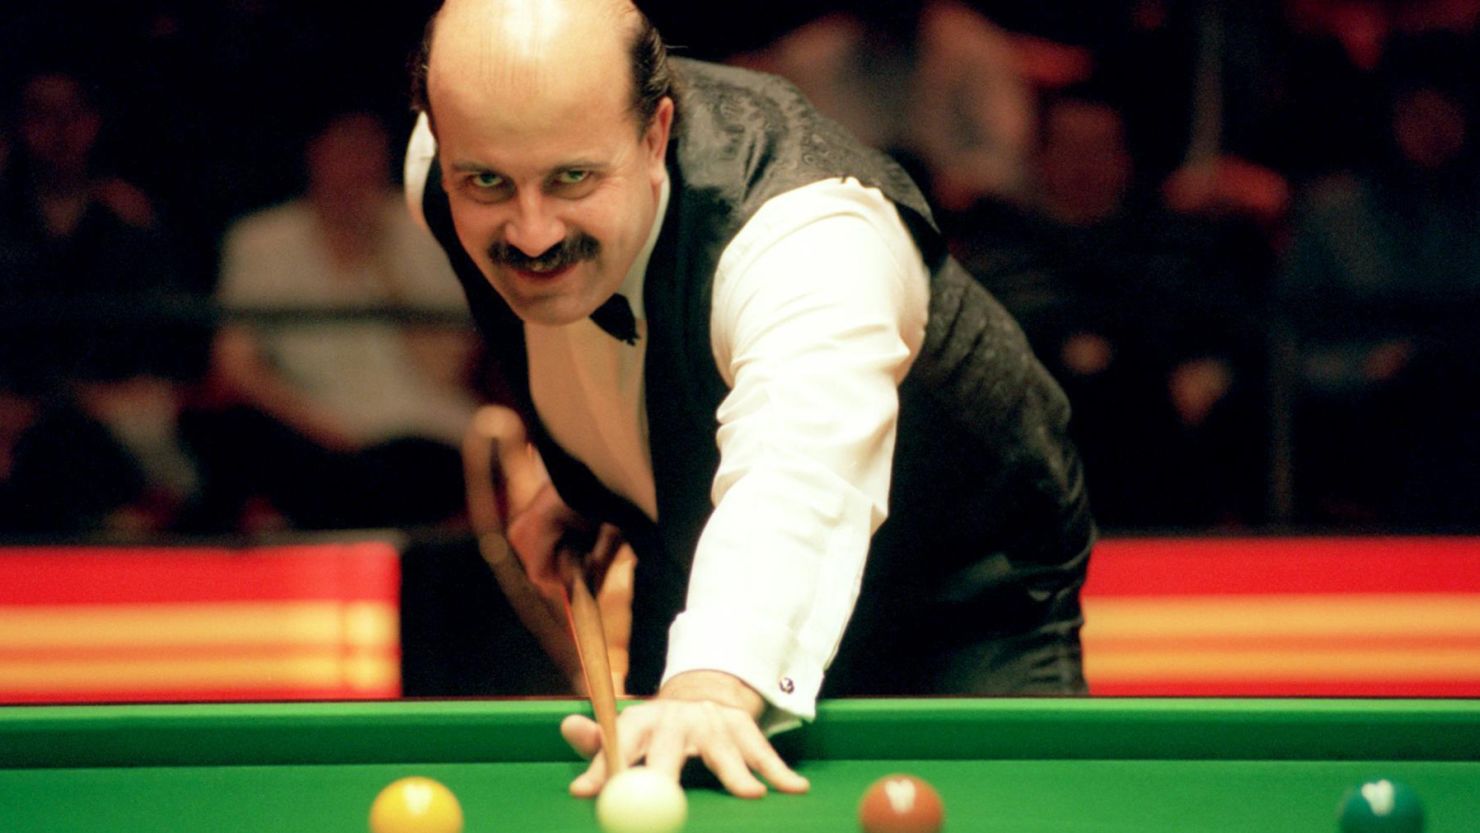 Thorne became an important figure in the snooker world in the 1980s.